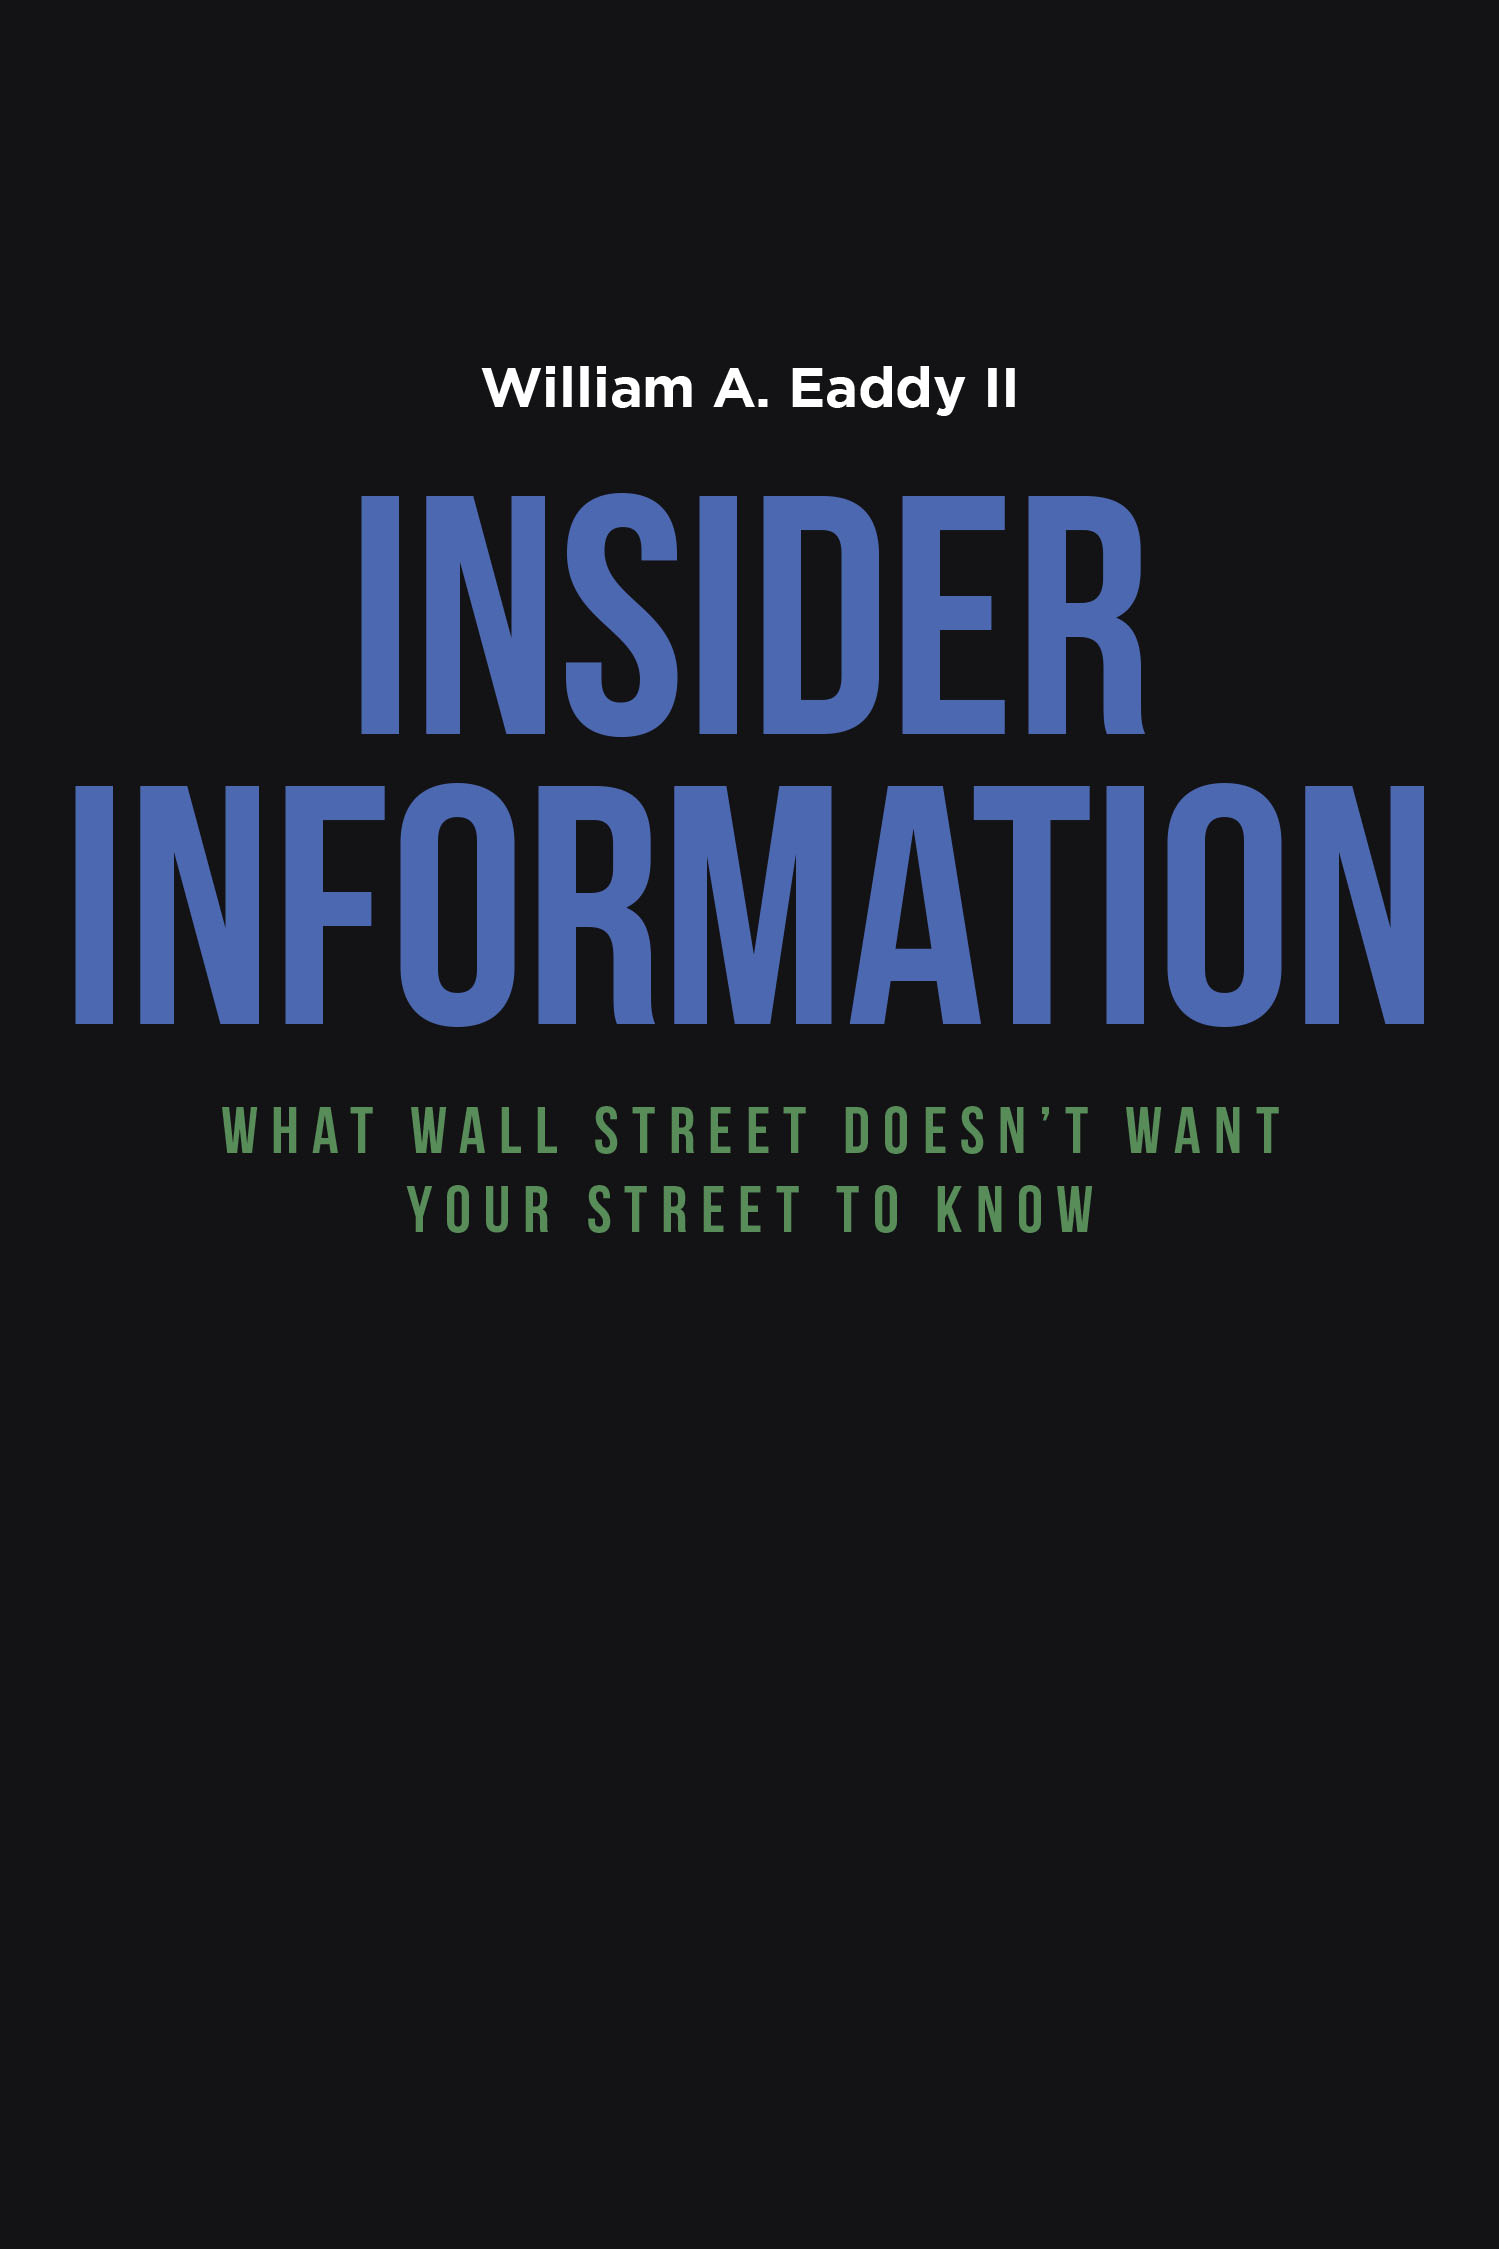 Author William A. Eaddy II’s New Book, “Insider Information: What Wall Street Doesn’t Want Your Street to Know,” Makes Financial Literacy Accessible